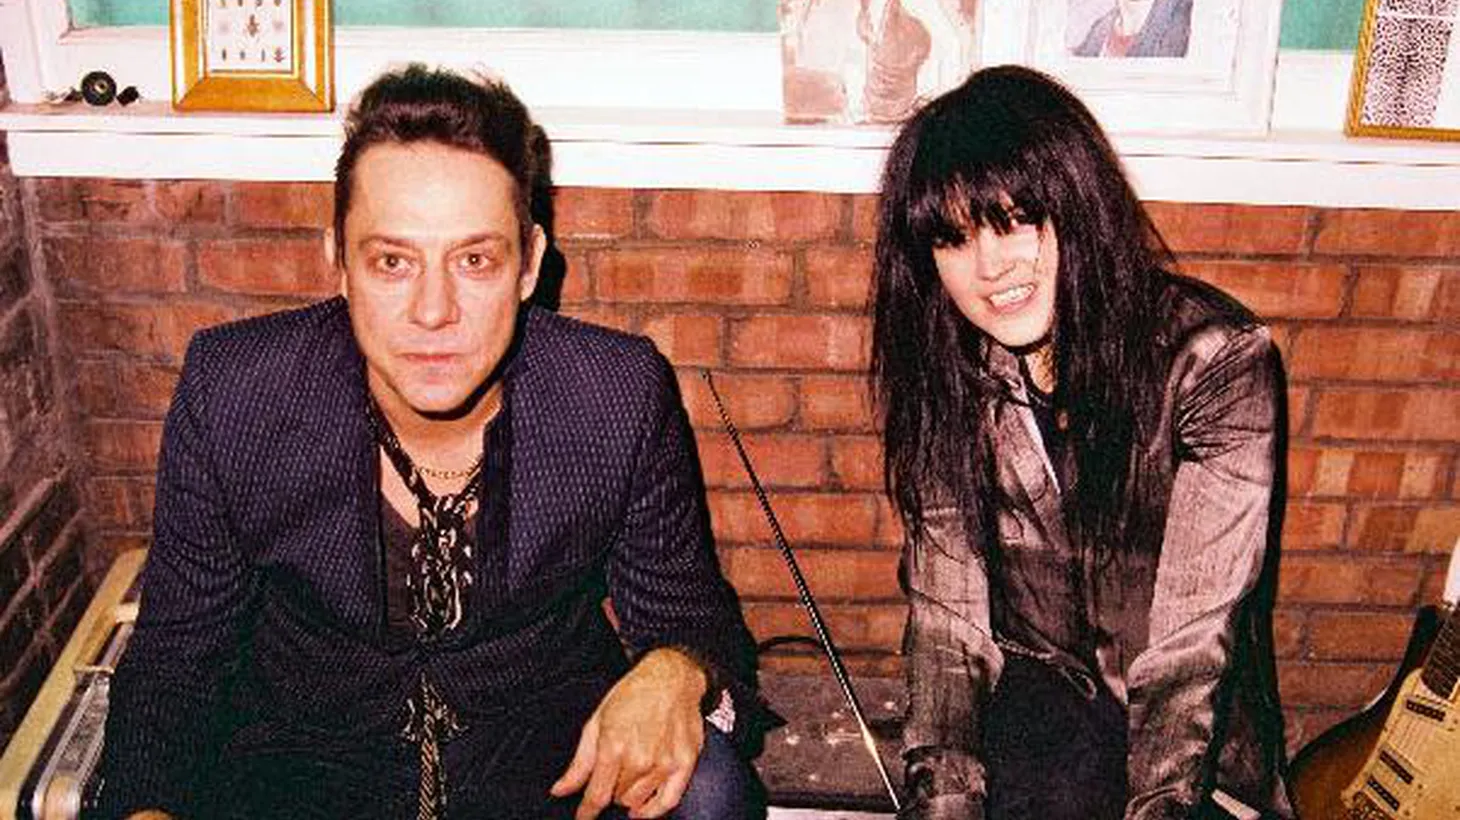 Alison Mosshart and Jamie Hince are the rock duo known as The Kills. They have an incredible chemistry and will be treating us to songs from their highly anticipated new release when they join Morning Becomes Eclectic as we broadcast from Austin's finest music festival, South by Southwest, at 11:15am.